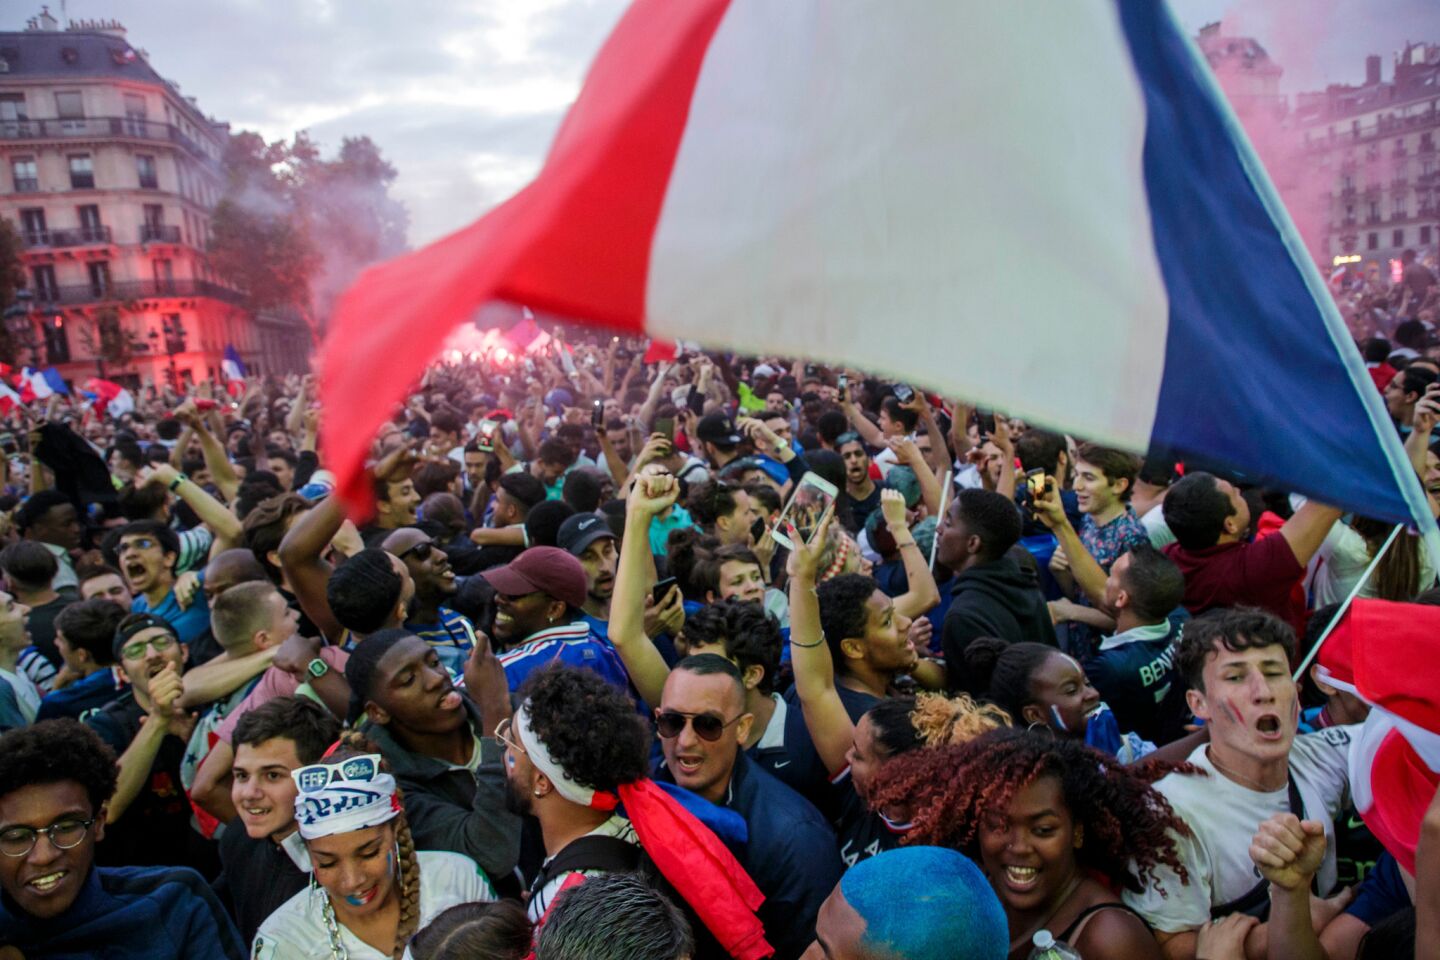 French fans at a public viewing near Paris' city hall celebrate after France beat Belgium 1-0 to advance to the finals of the World Cup.